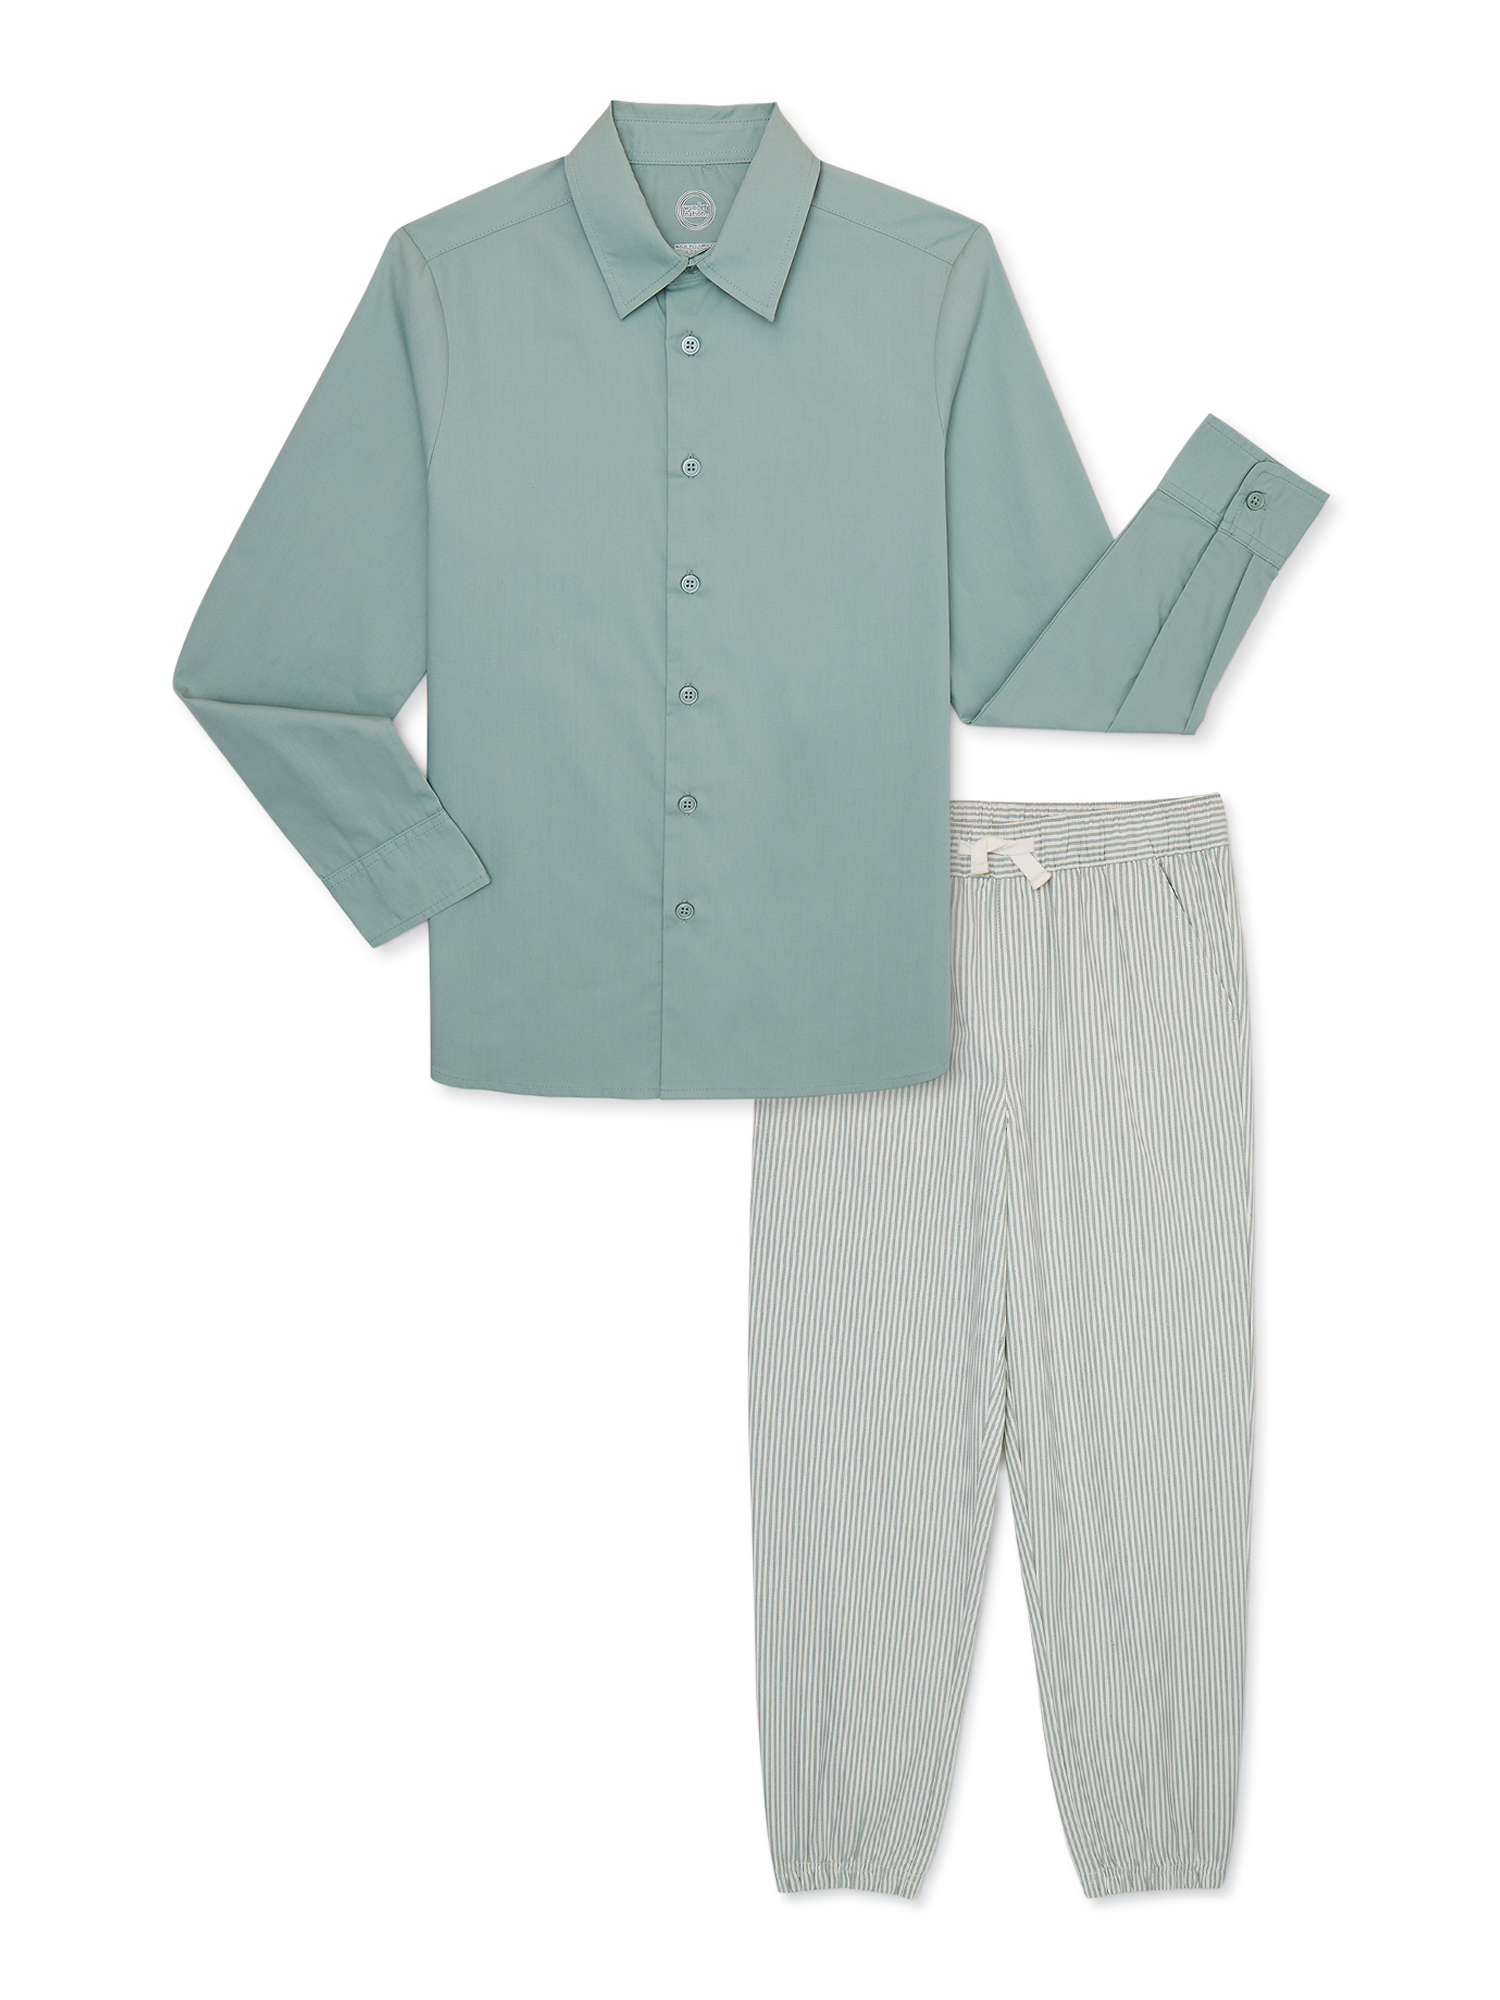 Wonder Nation Boys Button Front Shirt and Jogger Pants Set, 2-Piece, Sizes 4-18 - image 1 of 3